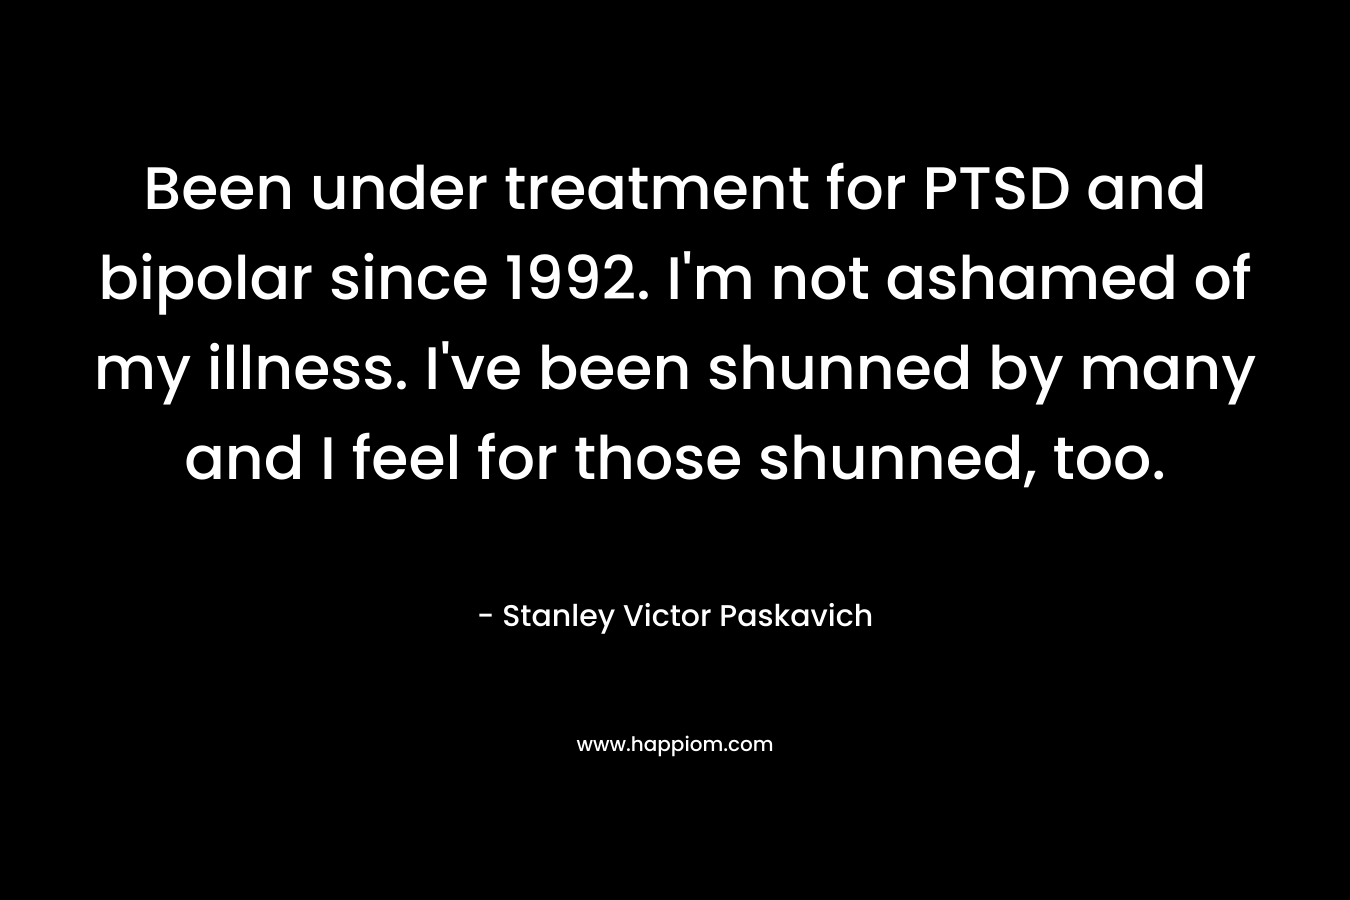 Been under treatment for PTSD and bipolar since 1992. I'm not ashamed of my illness. I've been shunned by many and I feel for those shunned, too.